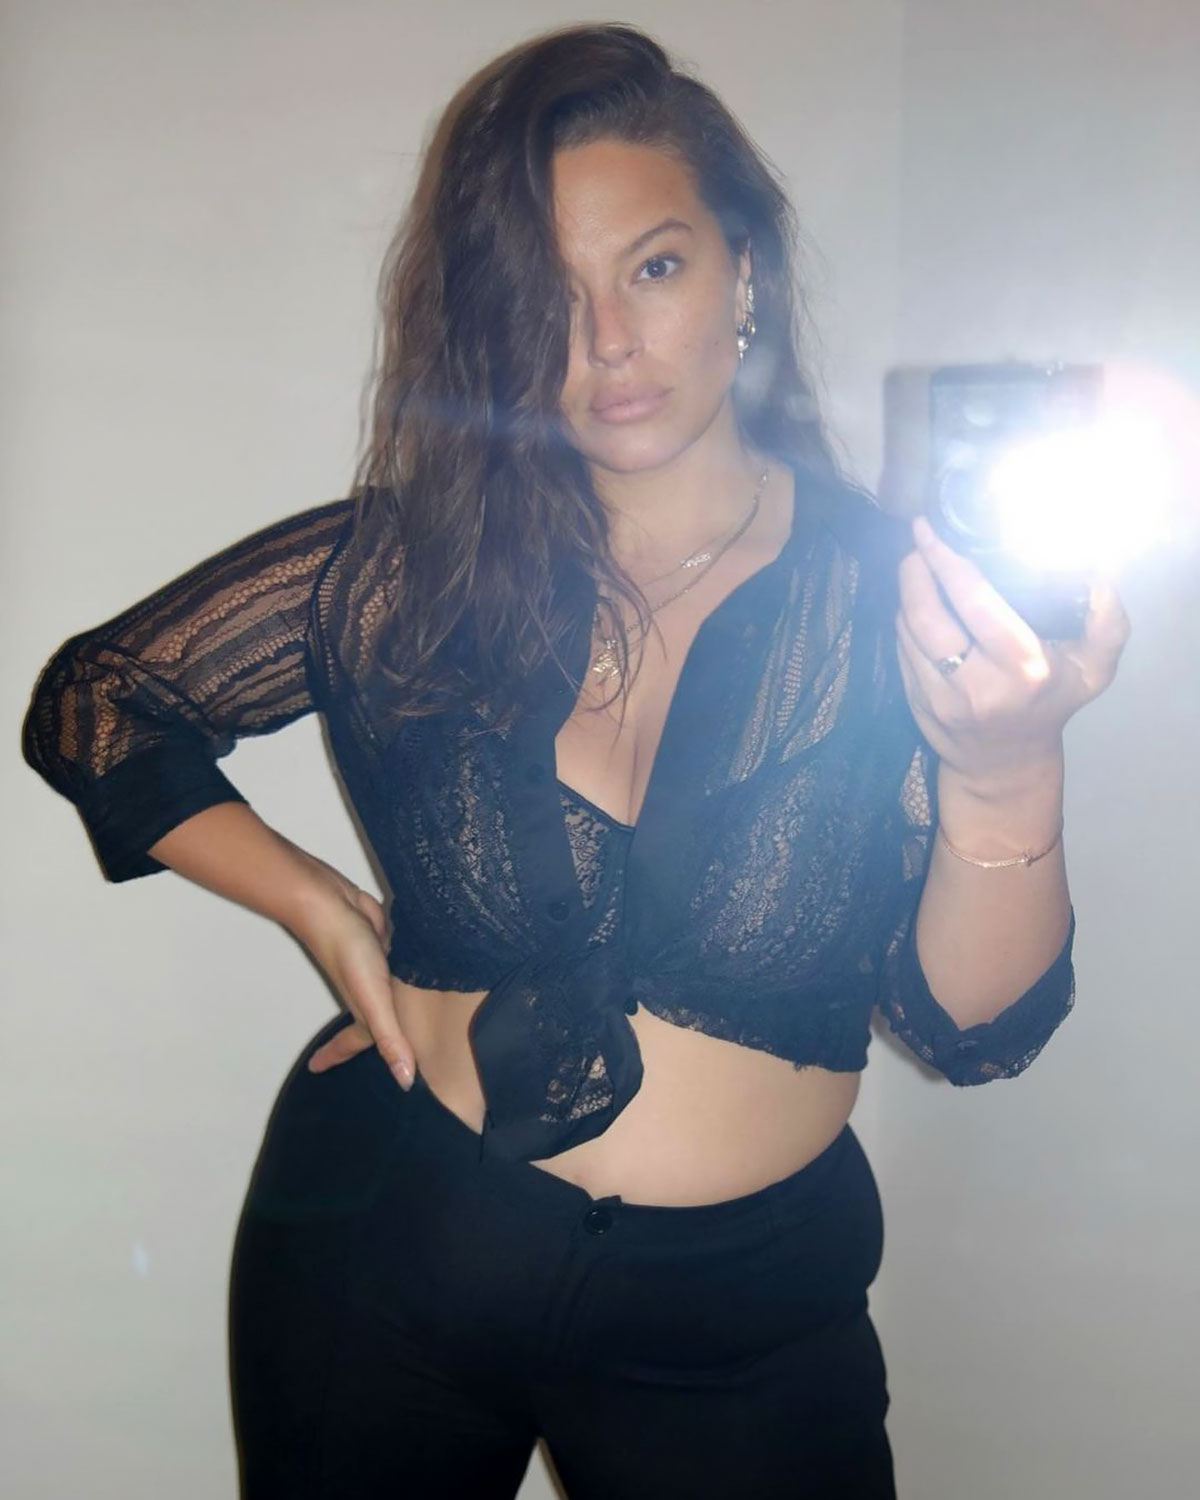 Ashley Graham Shows Off Curves in Lingerie